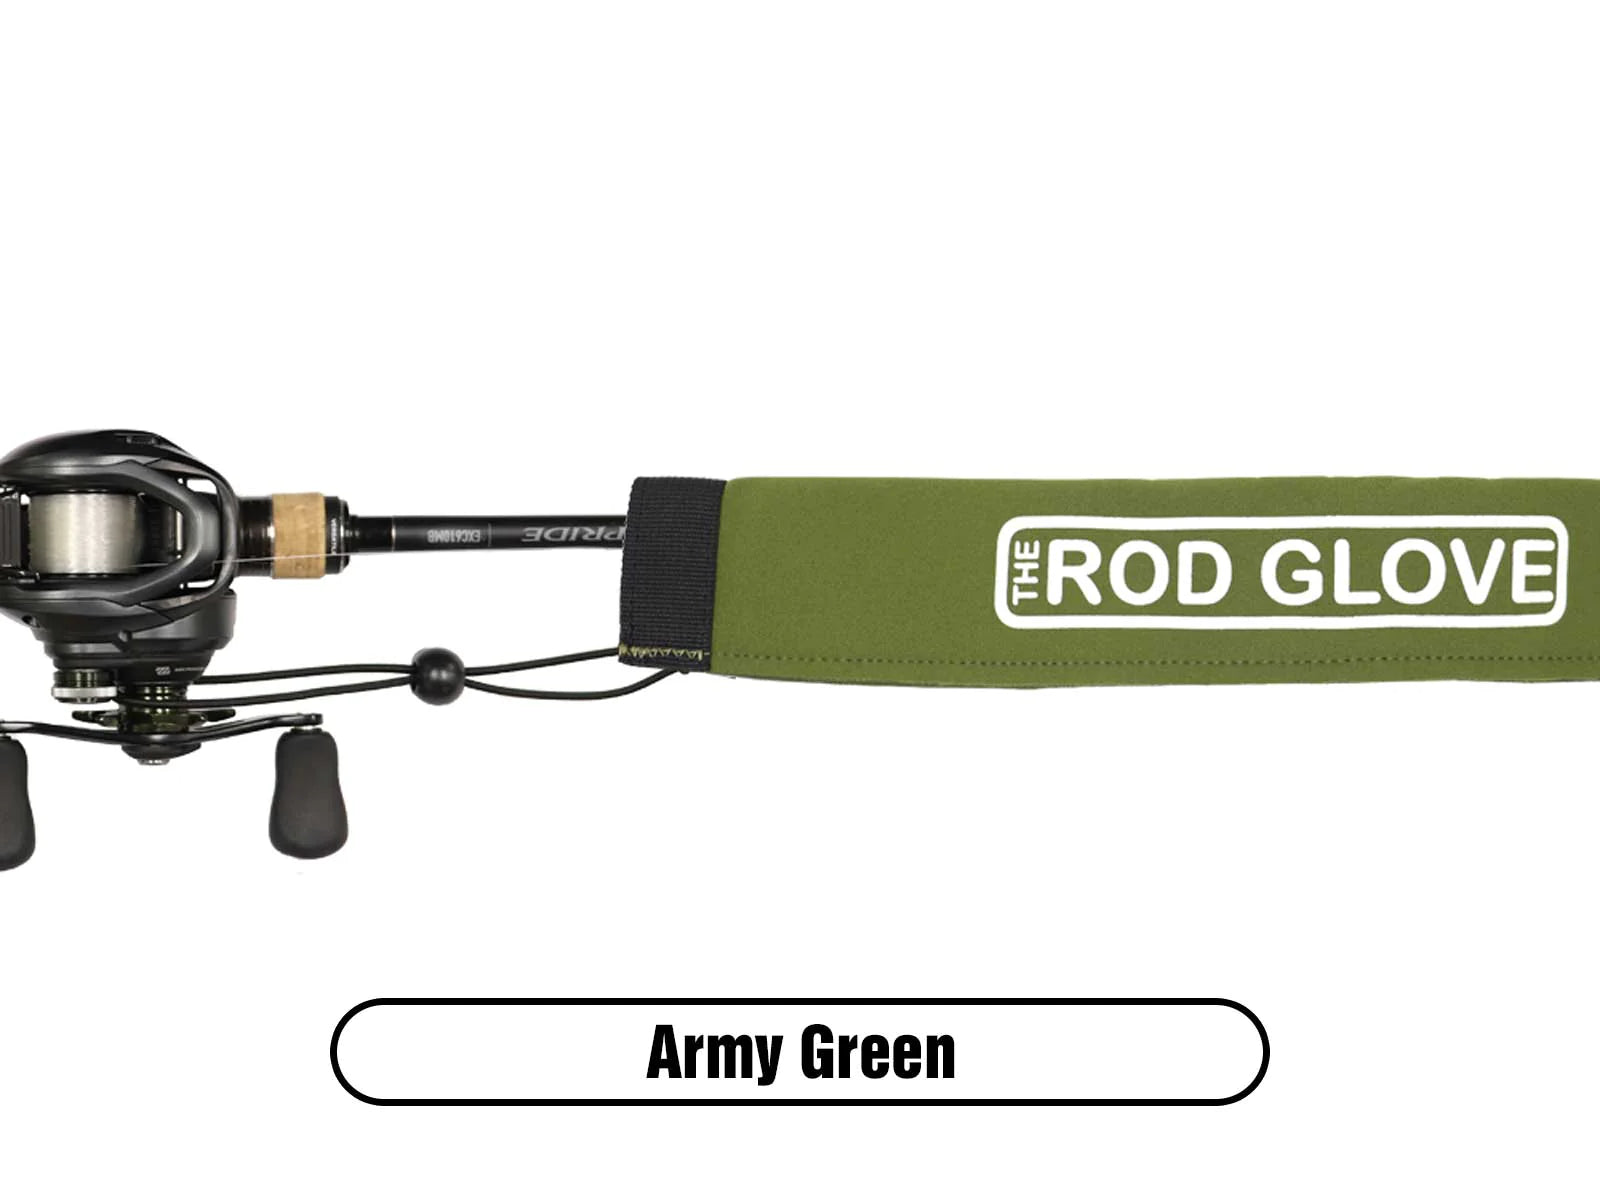 Buy army-green THE ROD GLOVE TOURNAMENT SERIES CASTING ROD GLOVE